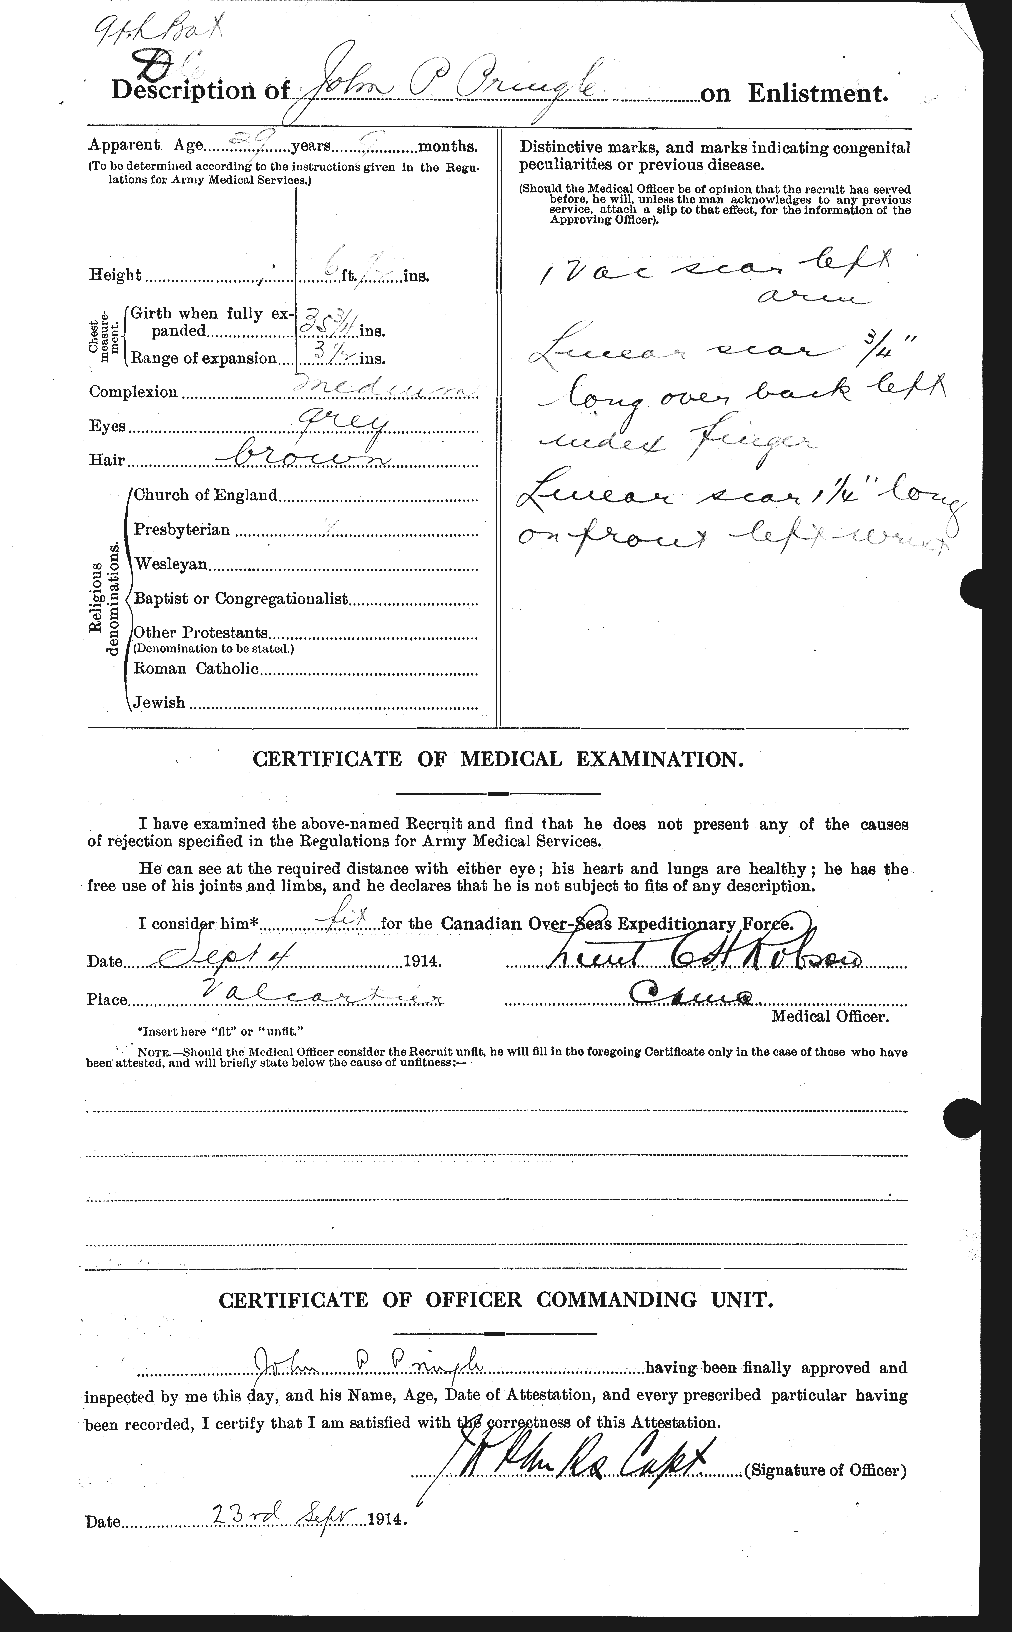 Personnel Records of the First World War - CEF 587934b